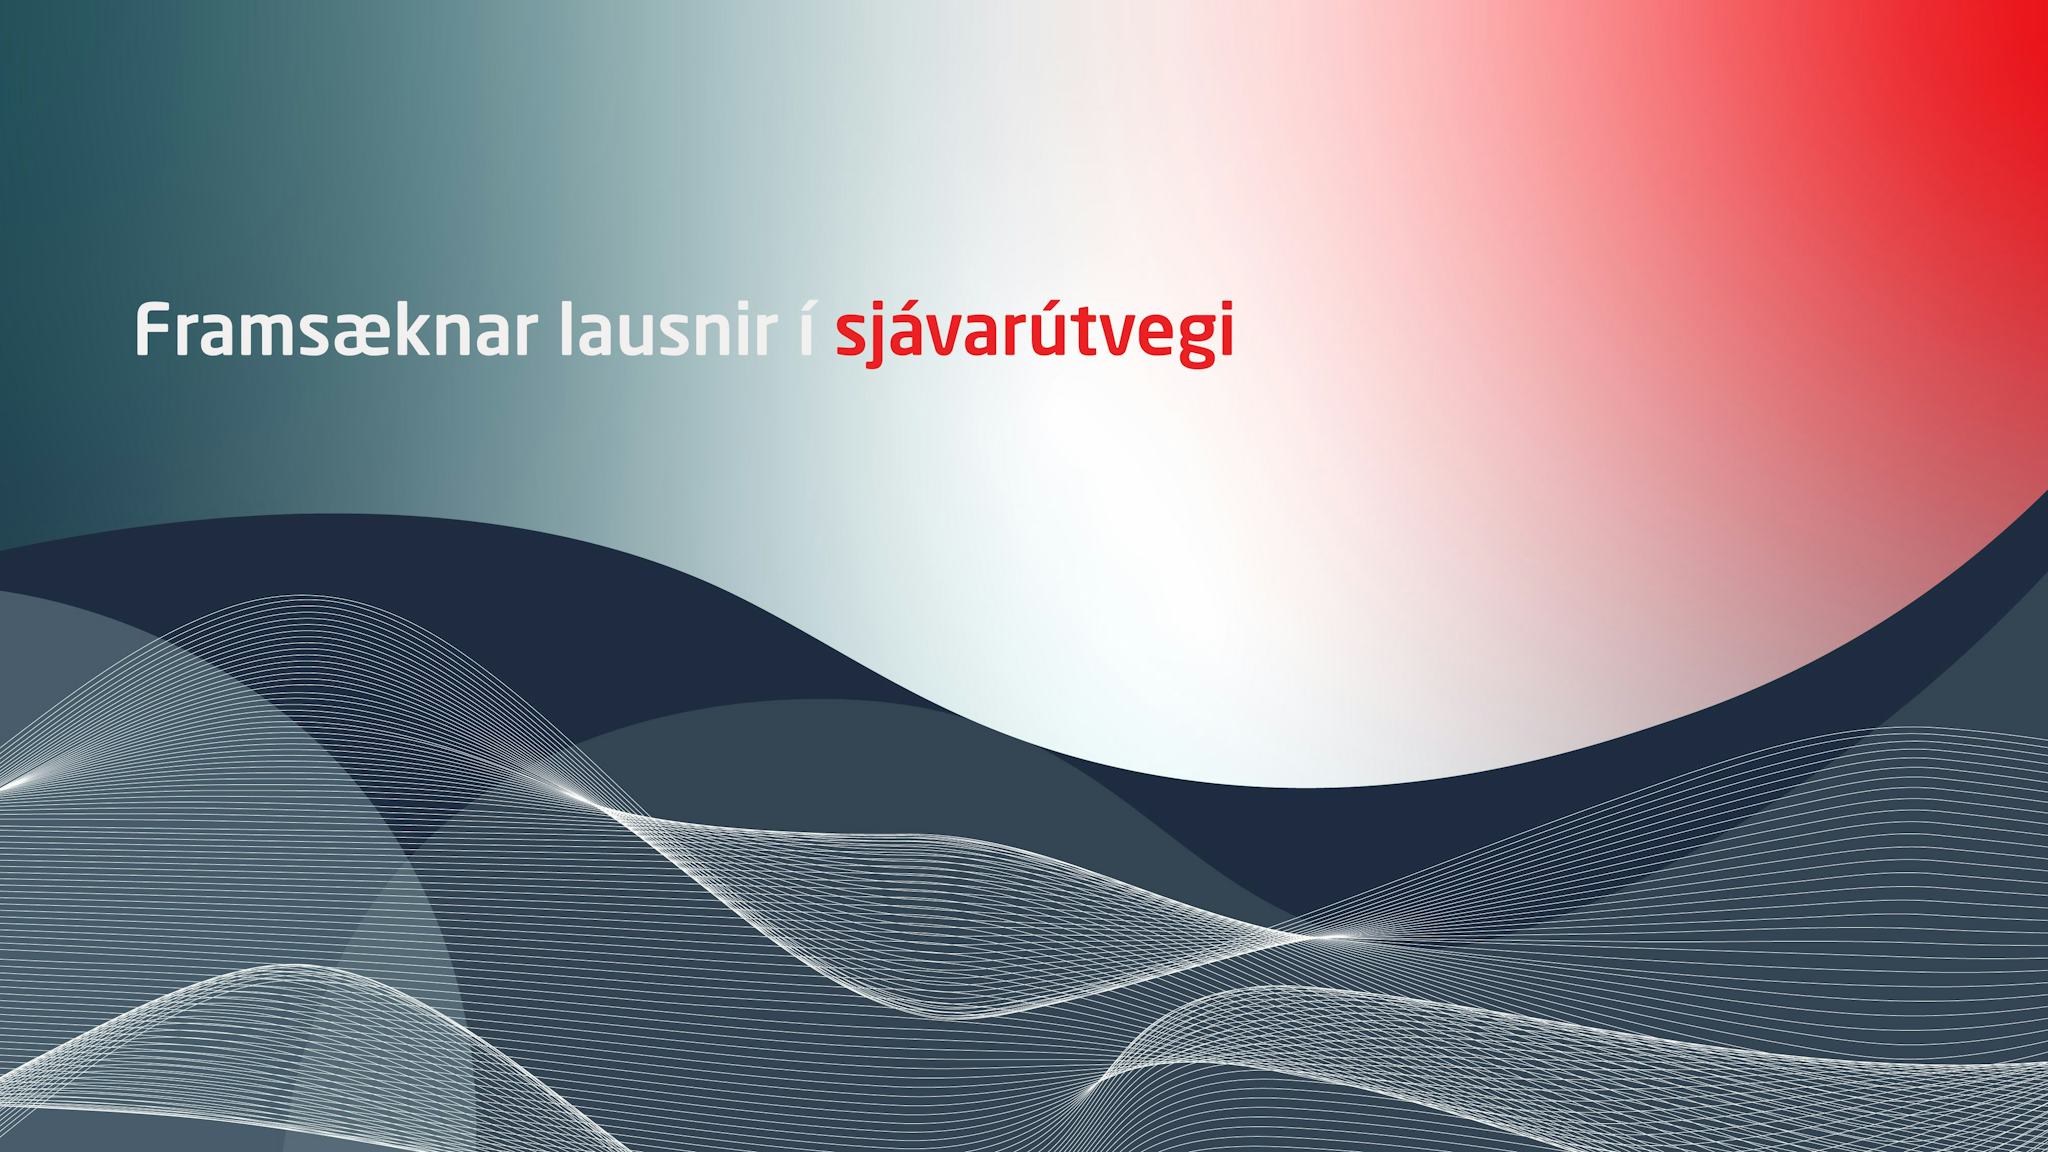 A graphic design with Icelandic text overlaid on a background featuring a blend of dark and light hues with a wavy pattern